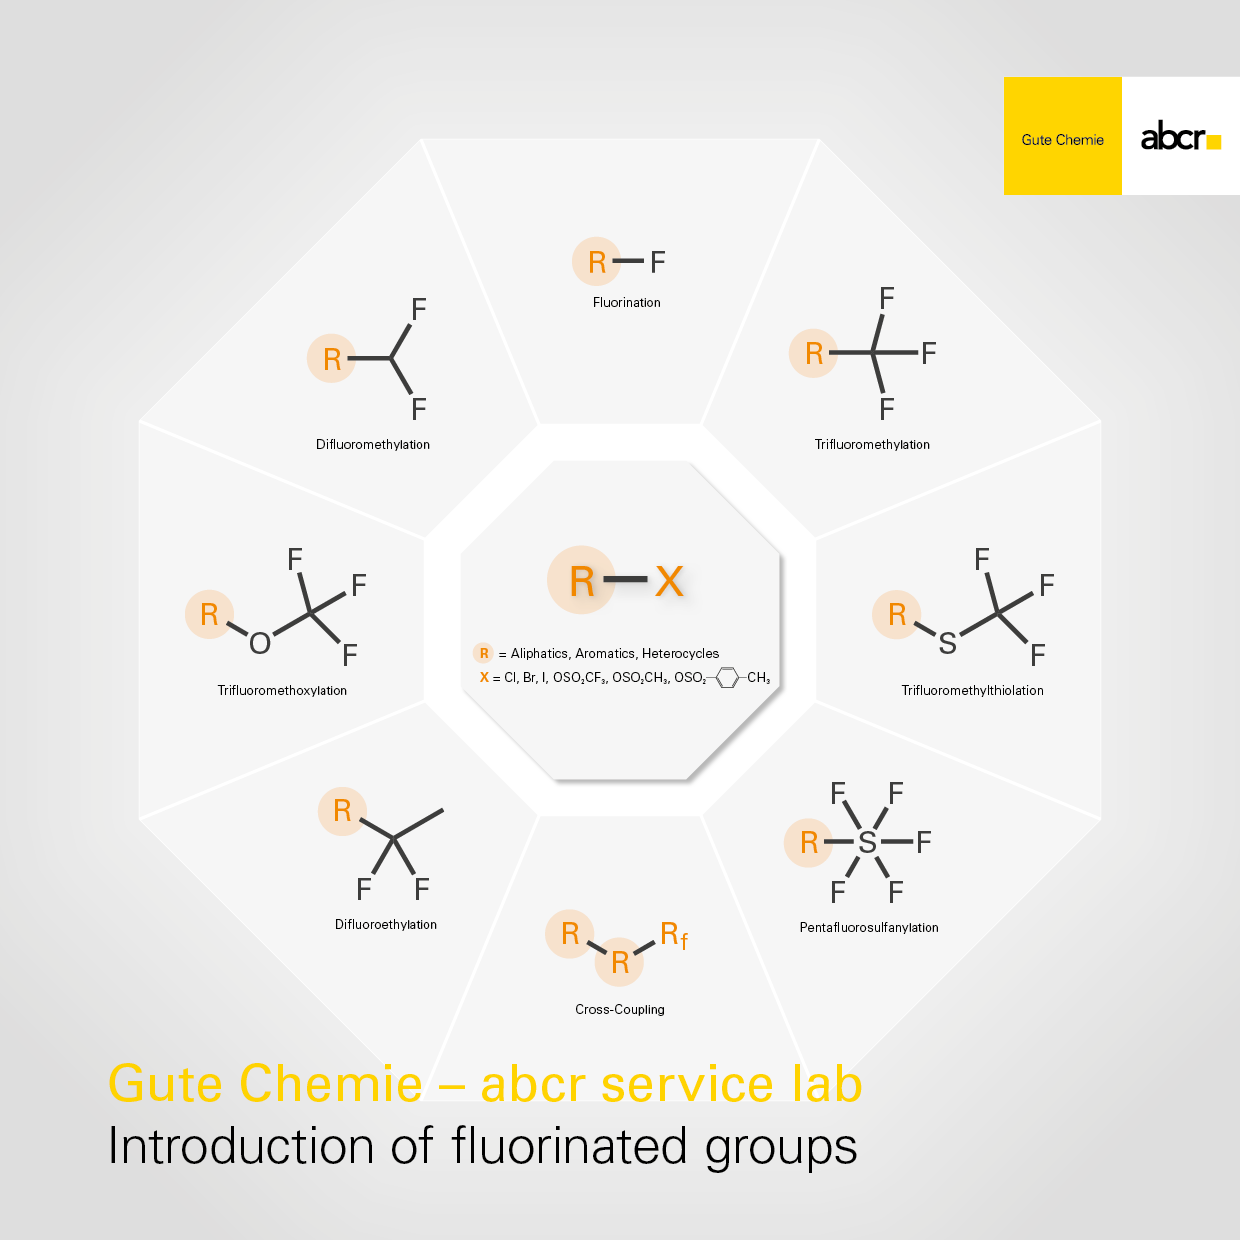 Introduction of fluorinated groups